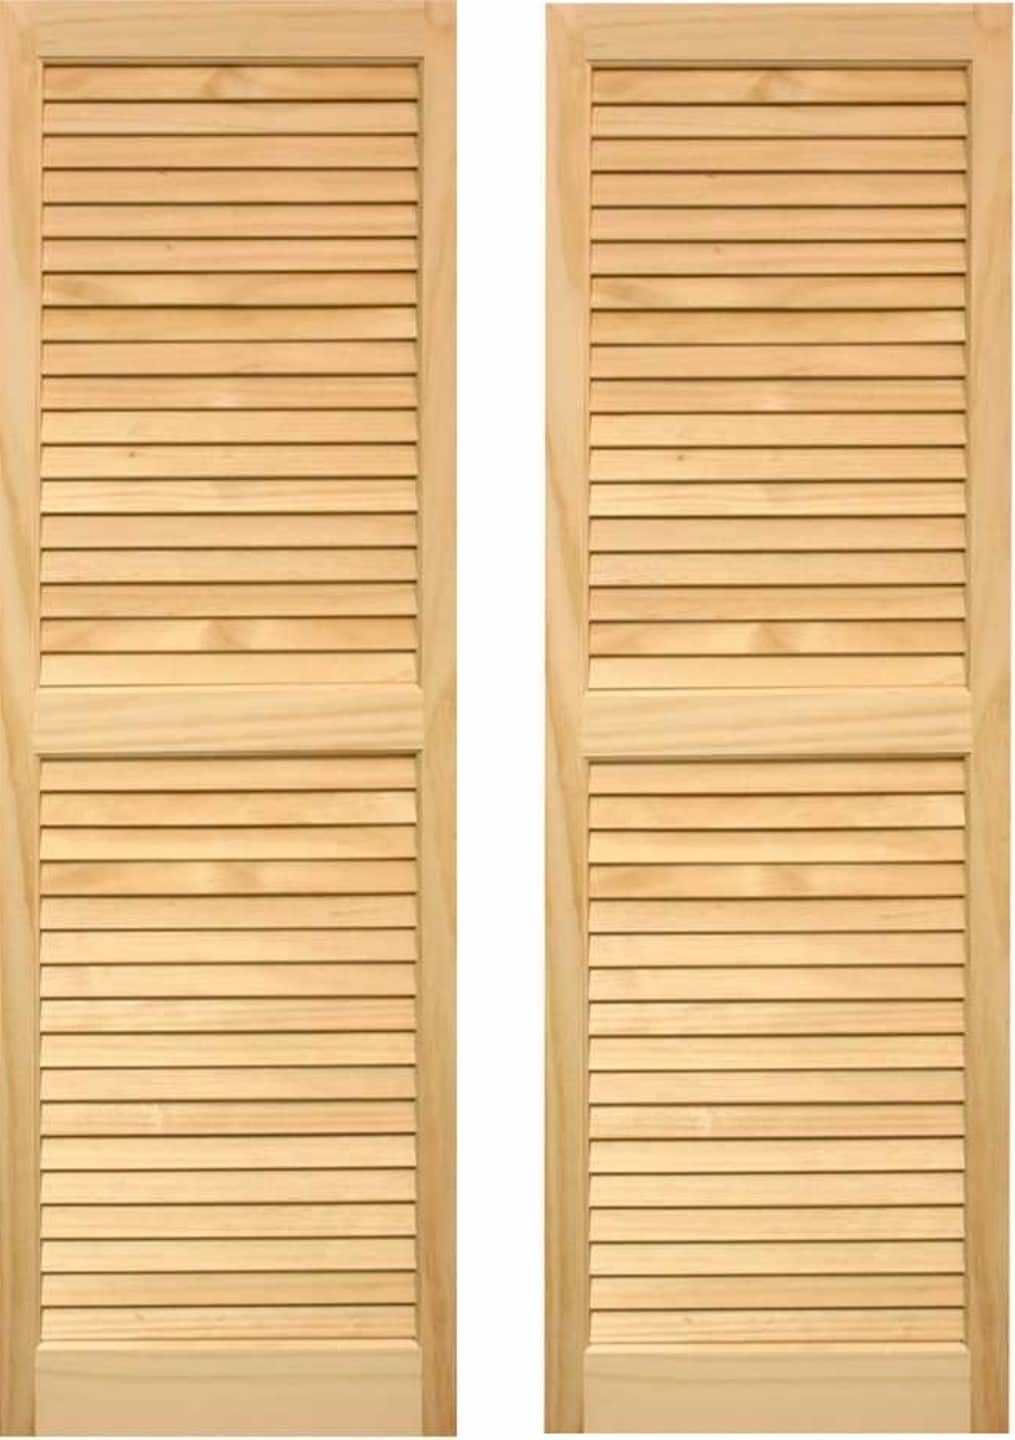 Pinecroft 15 in. x 51 in. Louvered Shutters Pair Unfinished SHL51